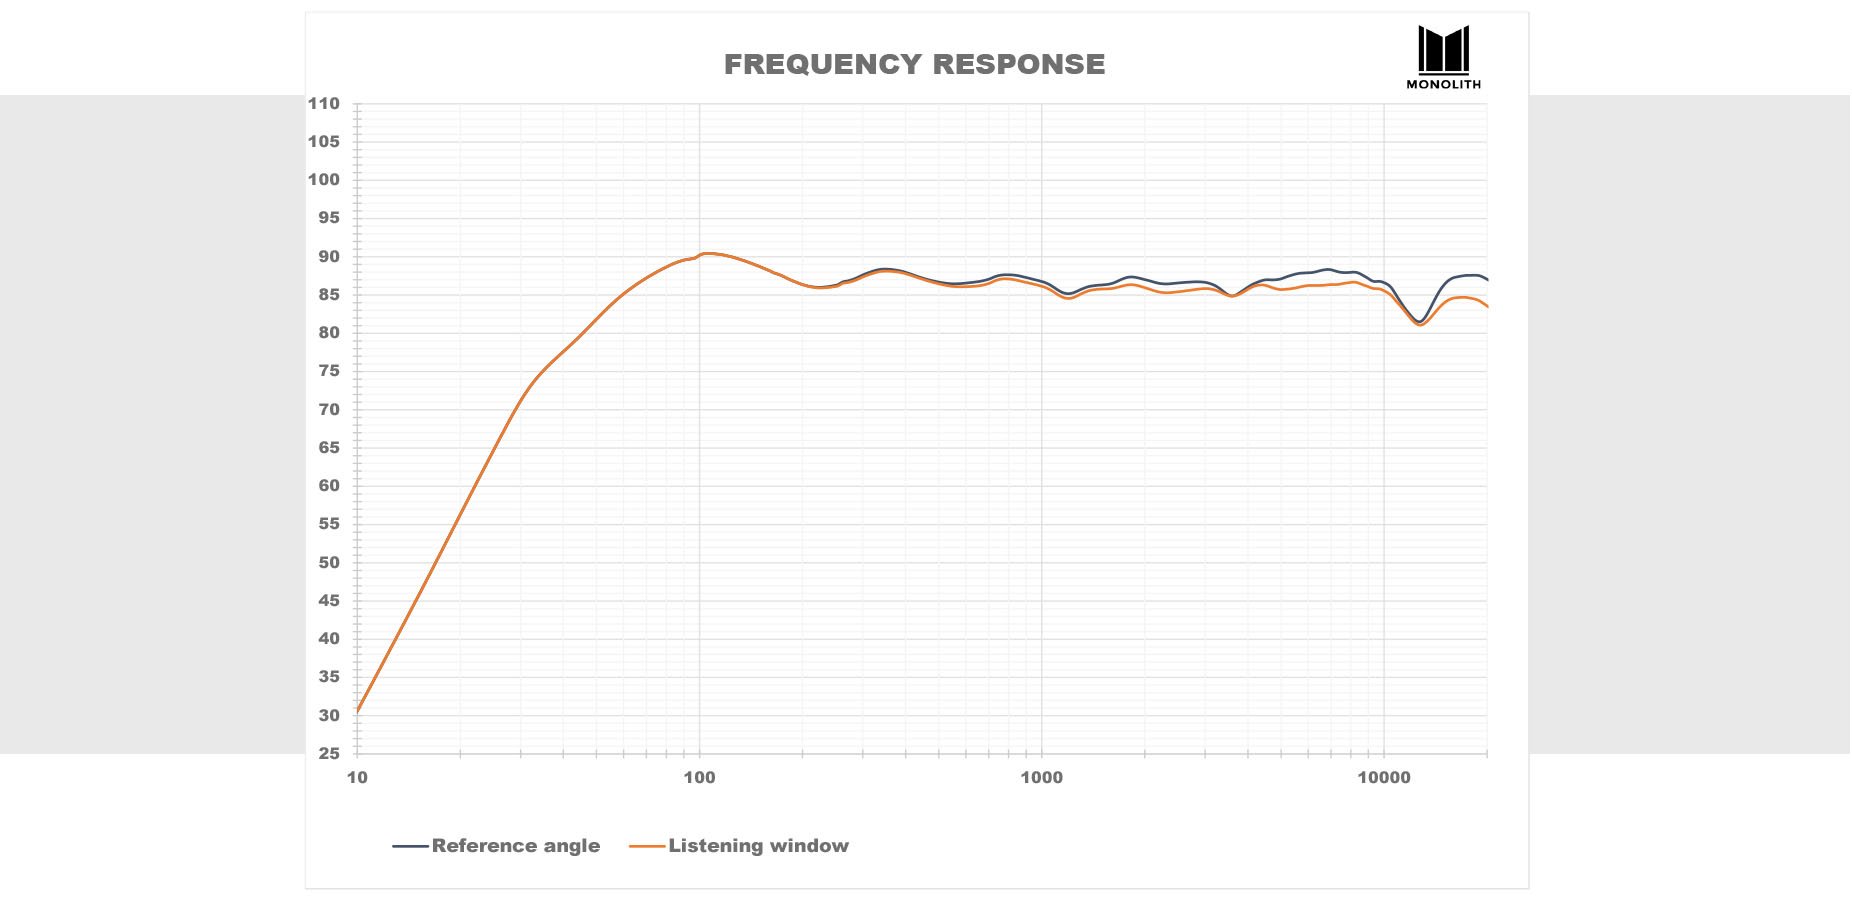 FREQUENCY RESPONSE CHART